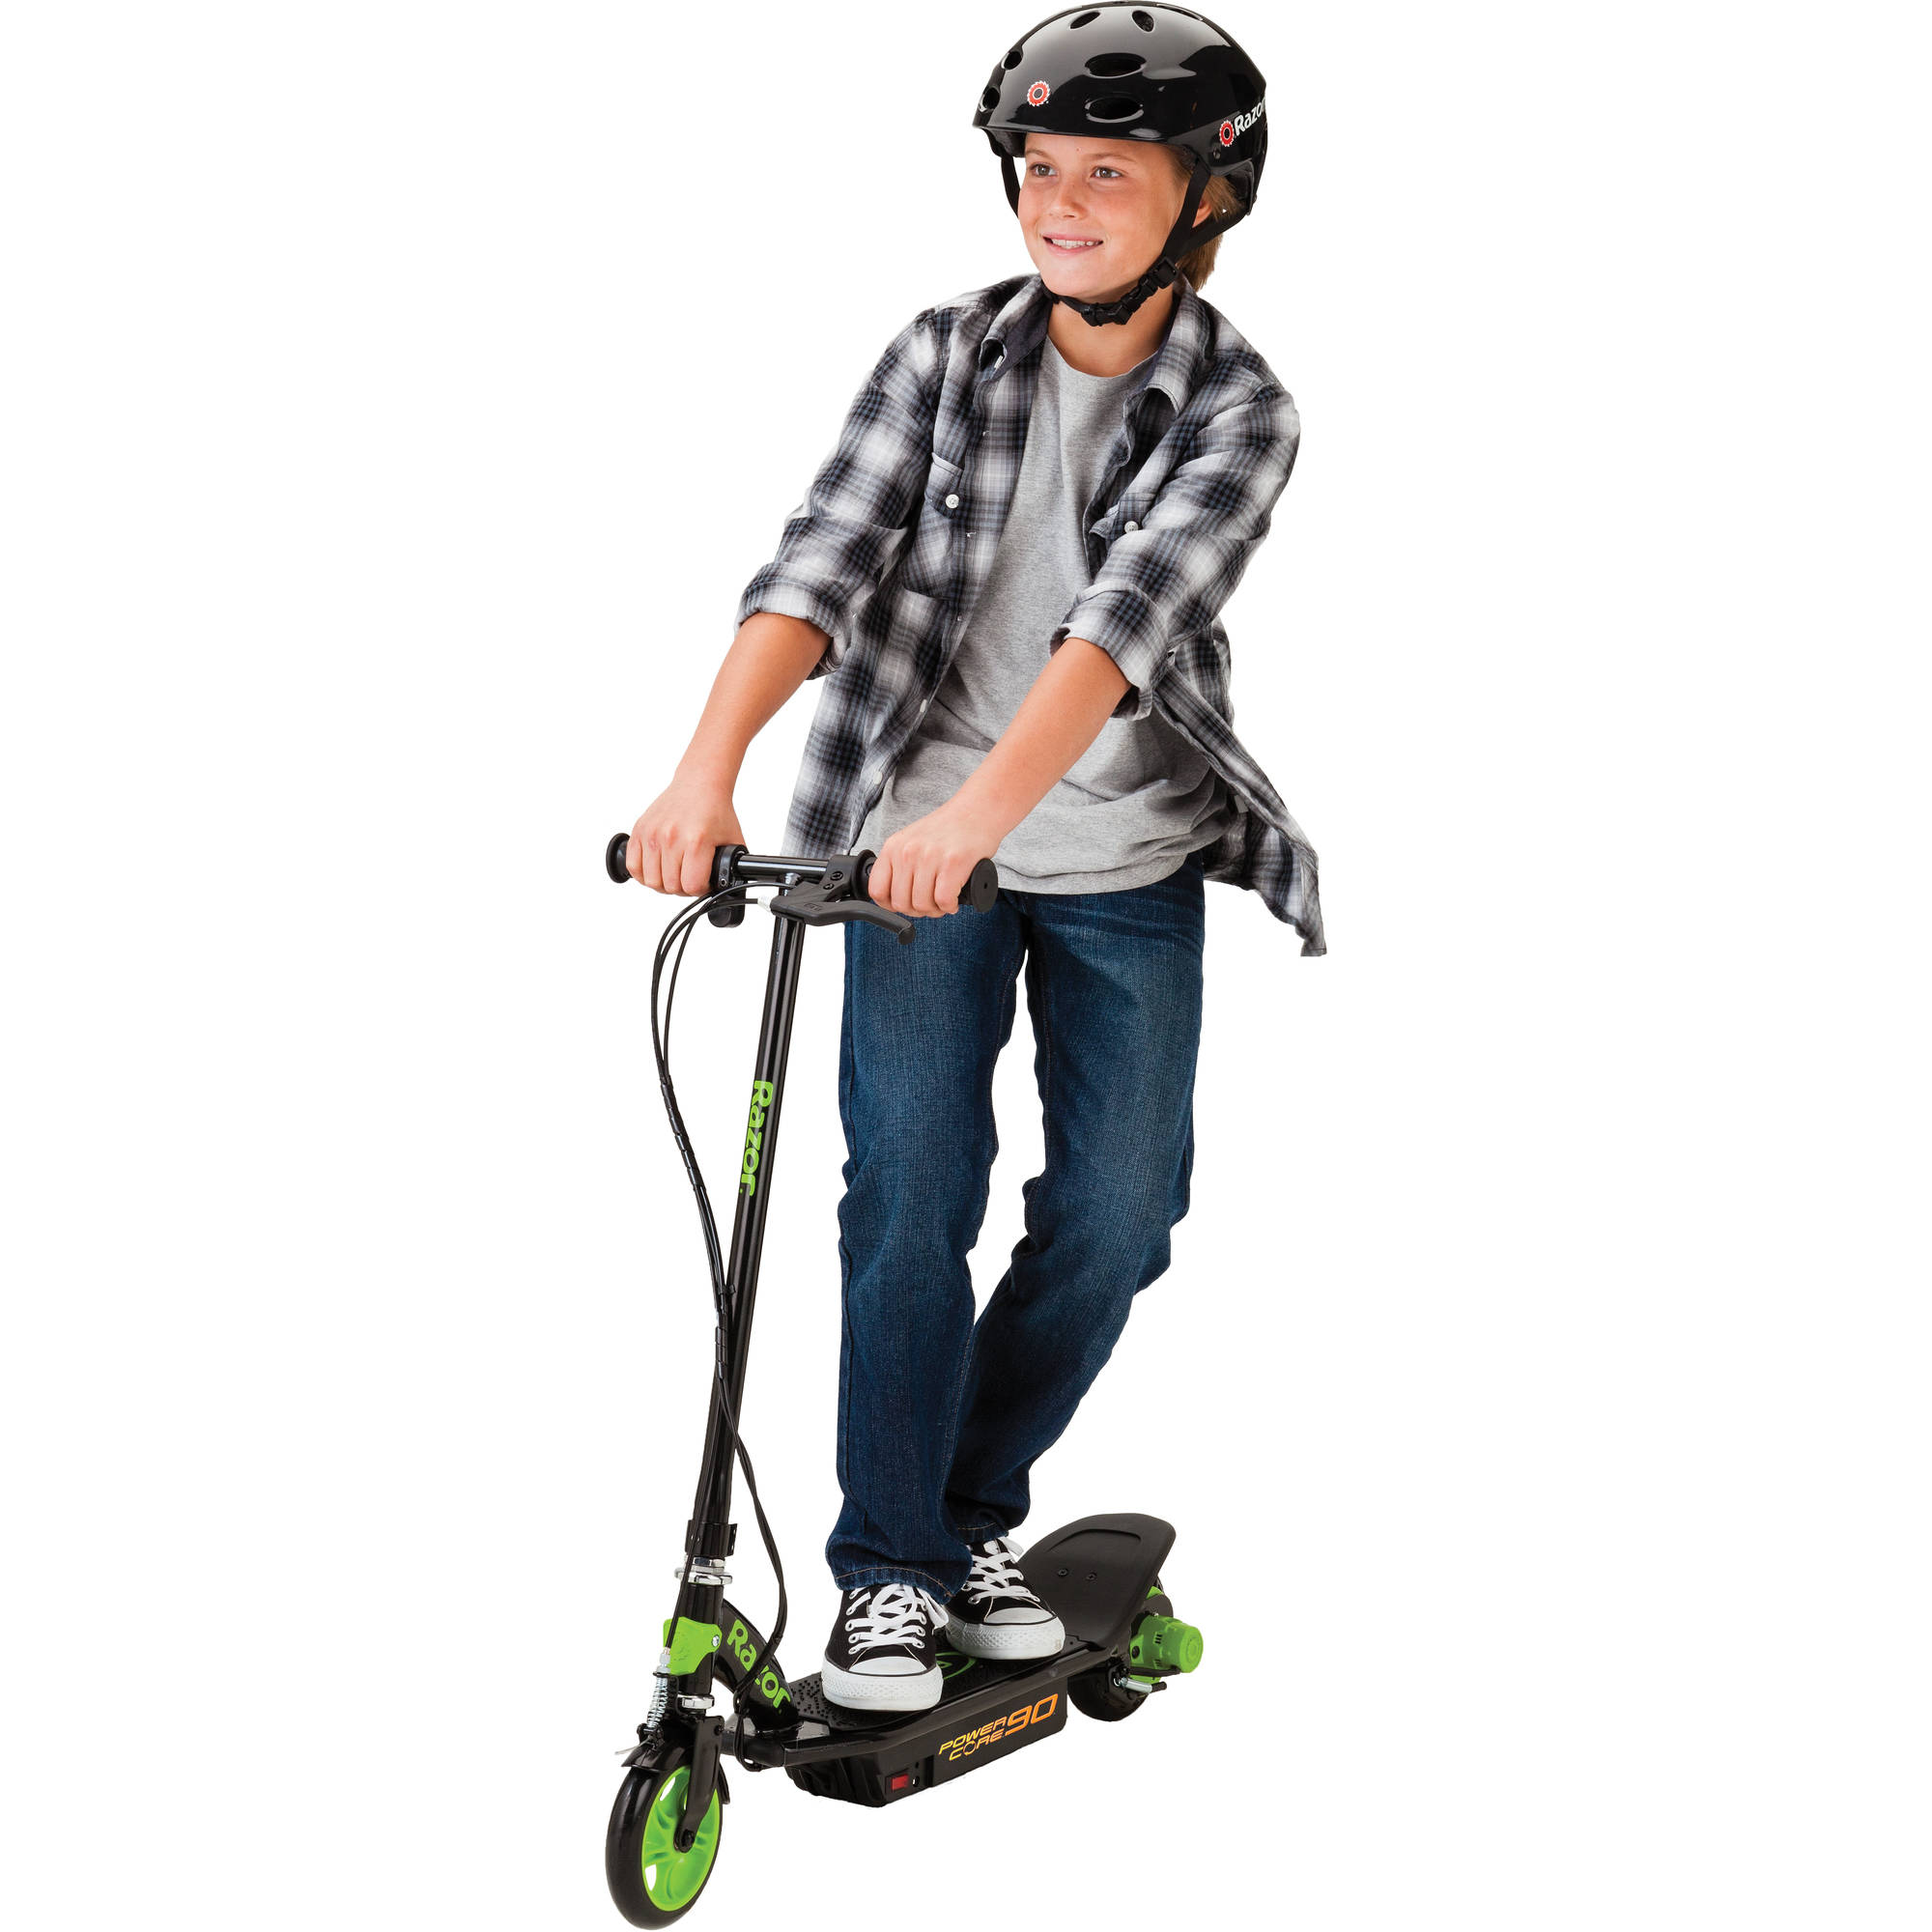 Razor Power Core 90 Electric Powered Scooter- Black/ Green - image 5 of 16